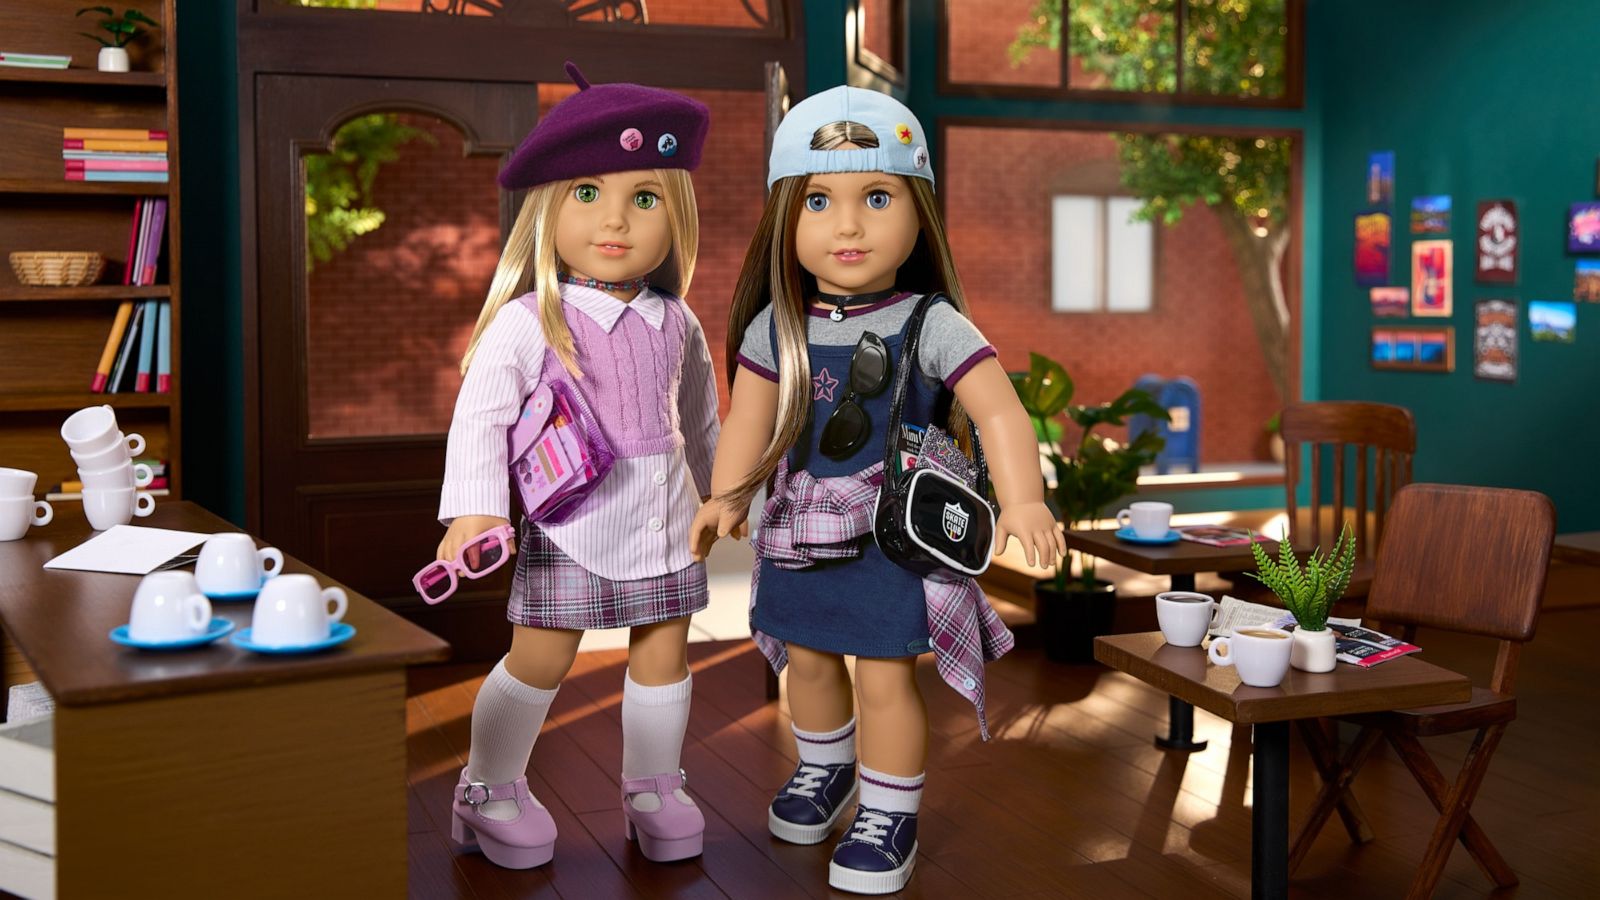 Ever Wanted to Combine American Girl Dolls and Disney? Target Has